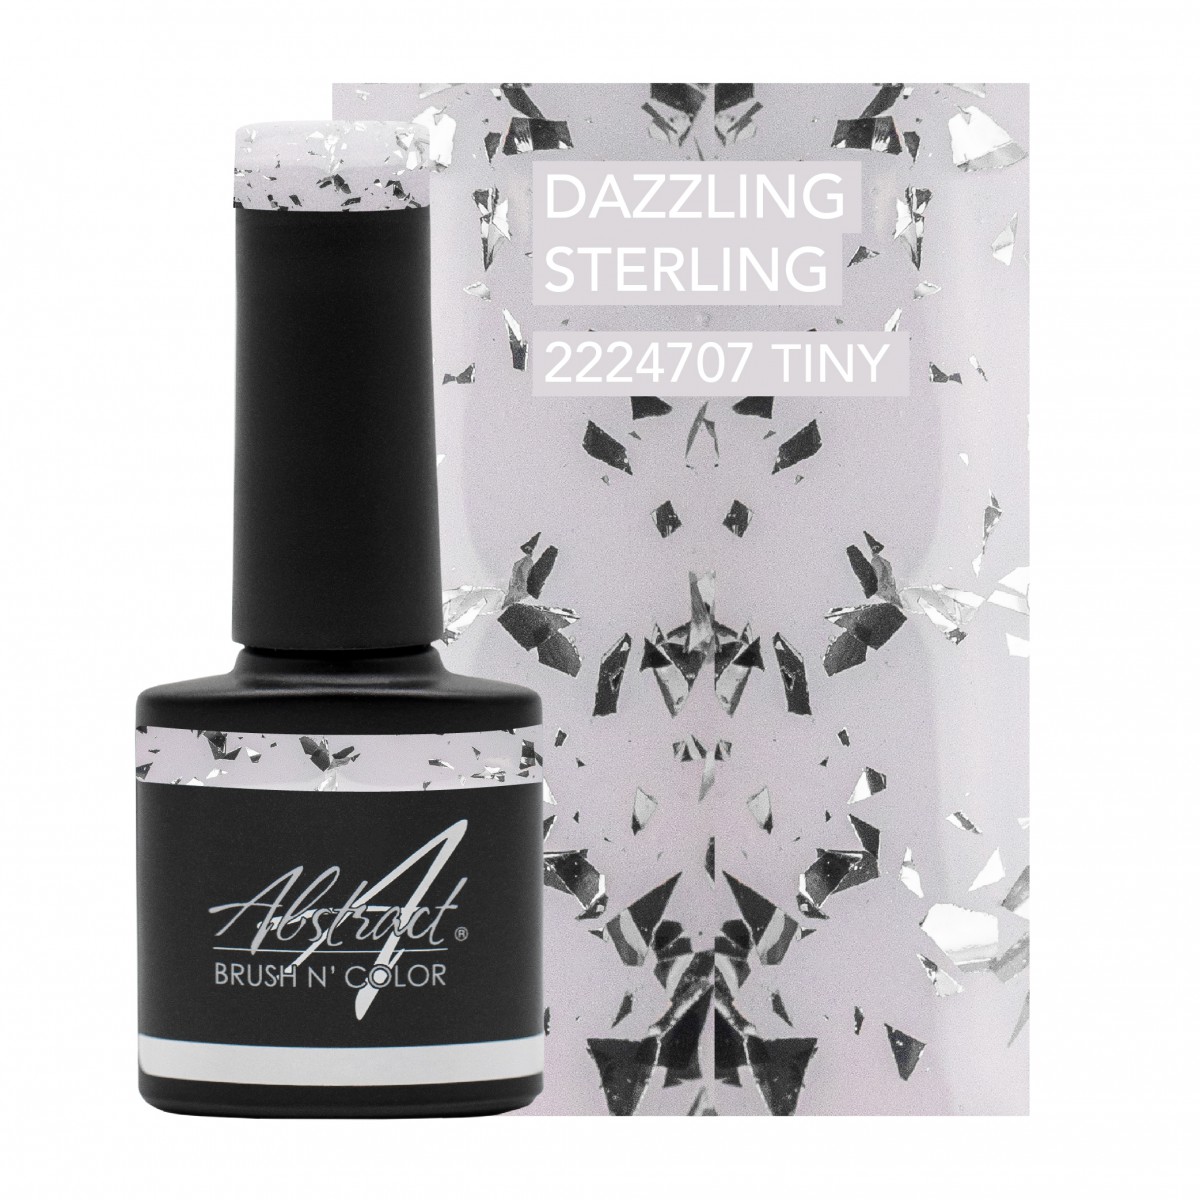 Dazzling Sterling Shield and Sparkle Top Gel Abstract